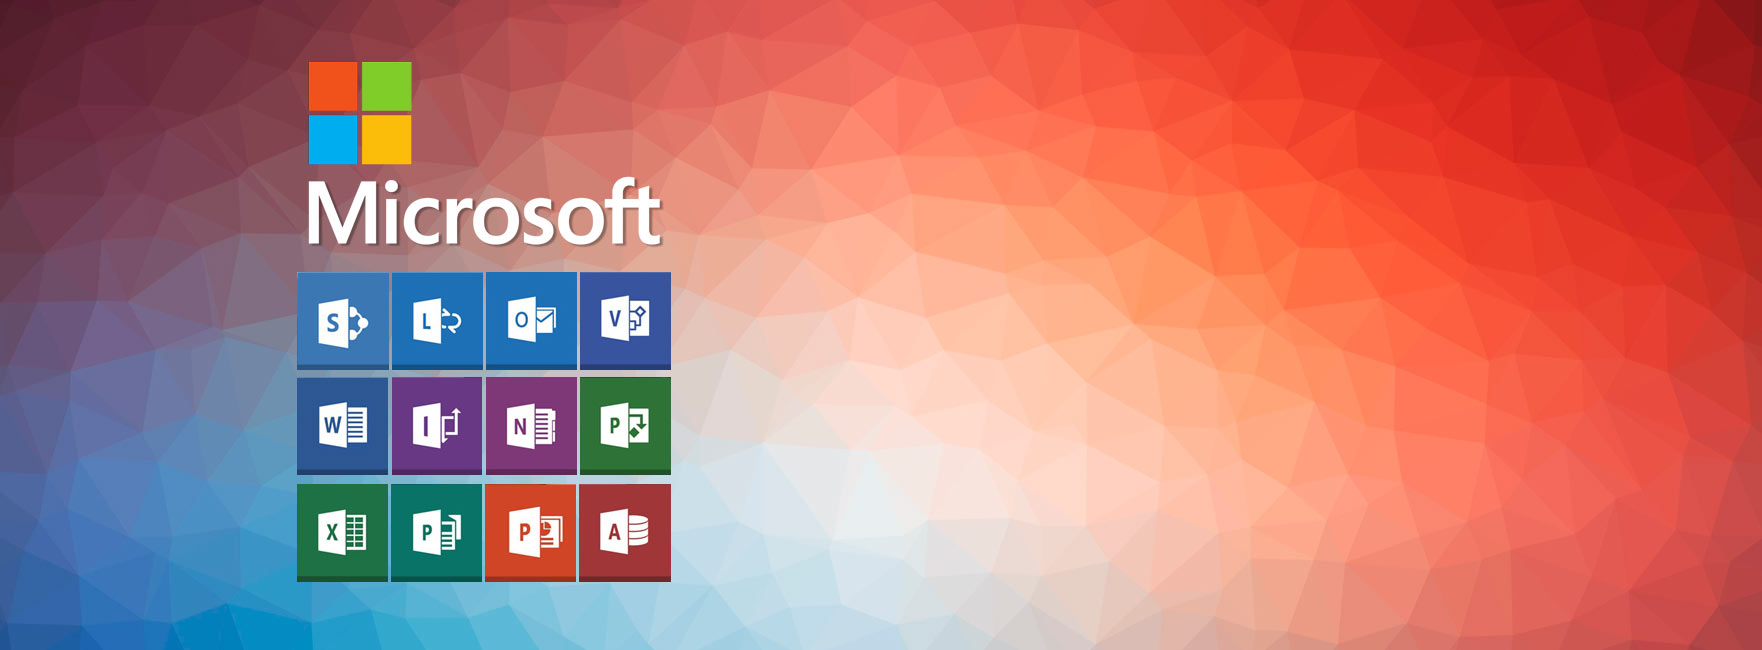 Microsoft Products Banner